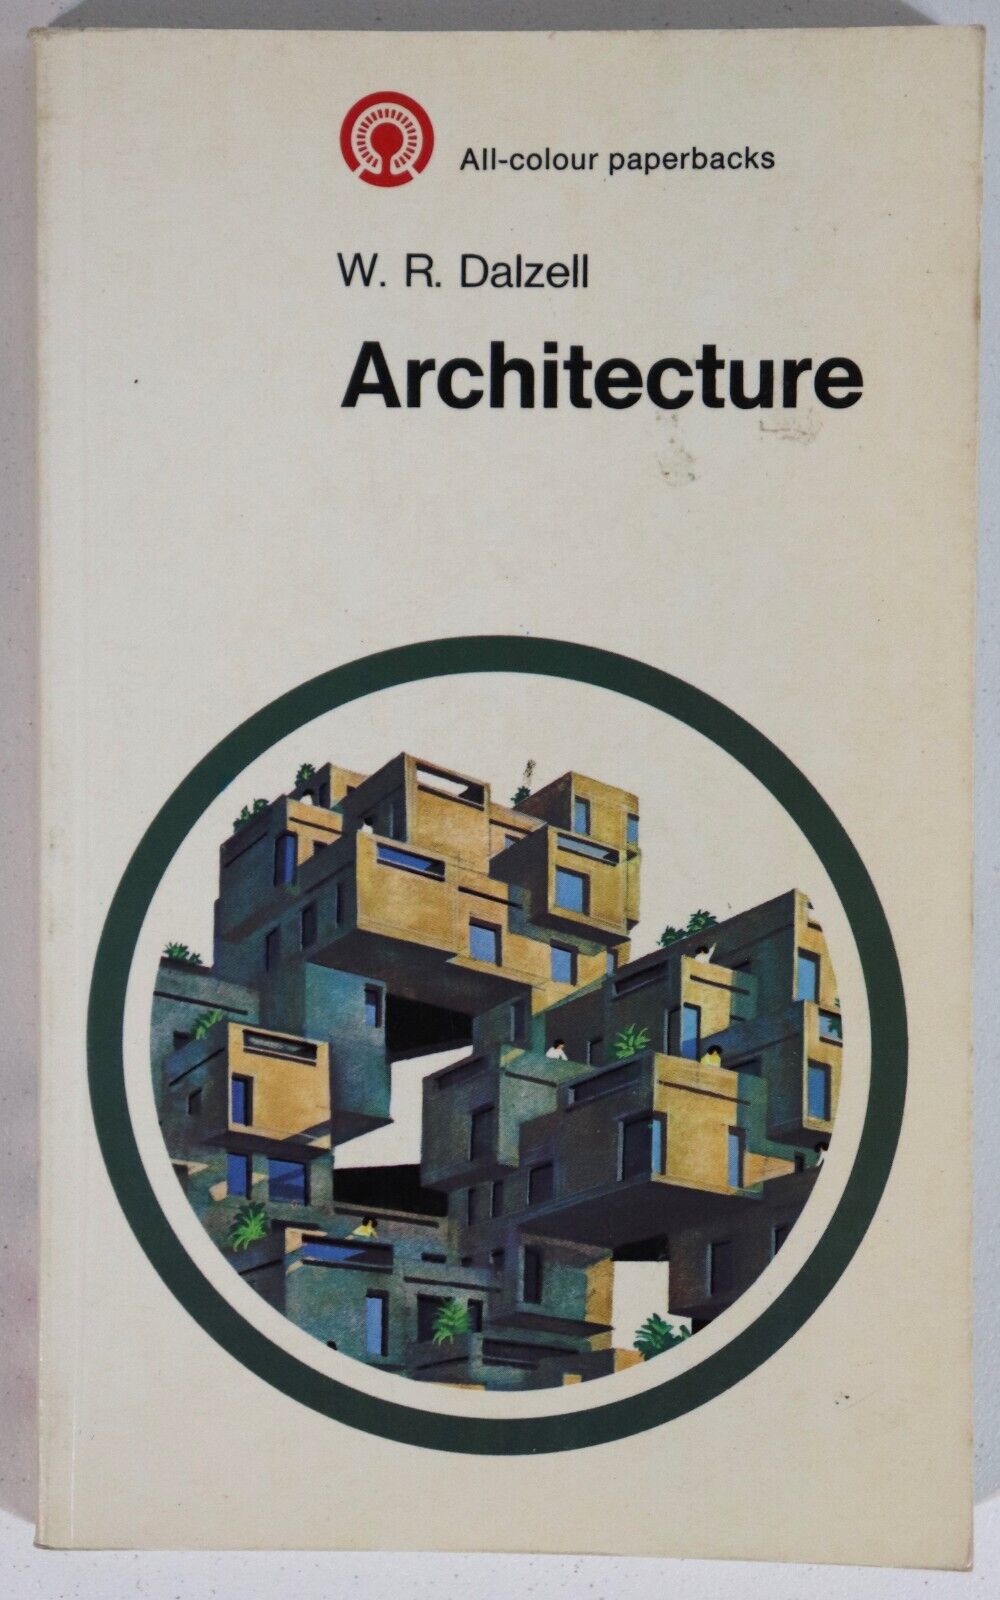 Architecture by W.R. Dalzell - 1969 - Architectural Reference Paperback